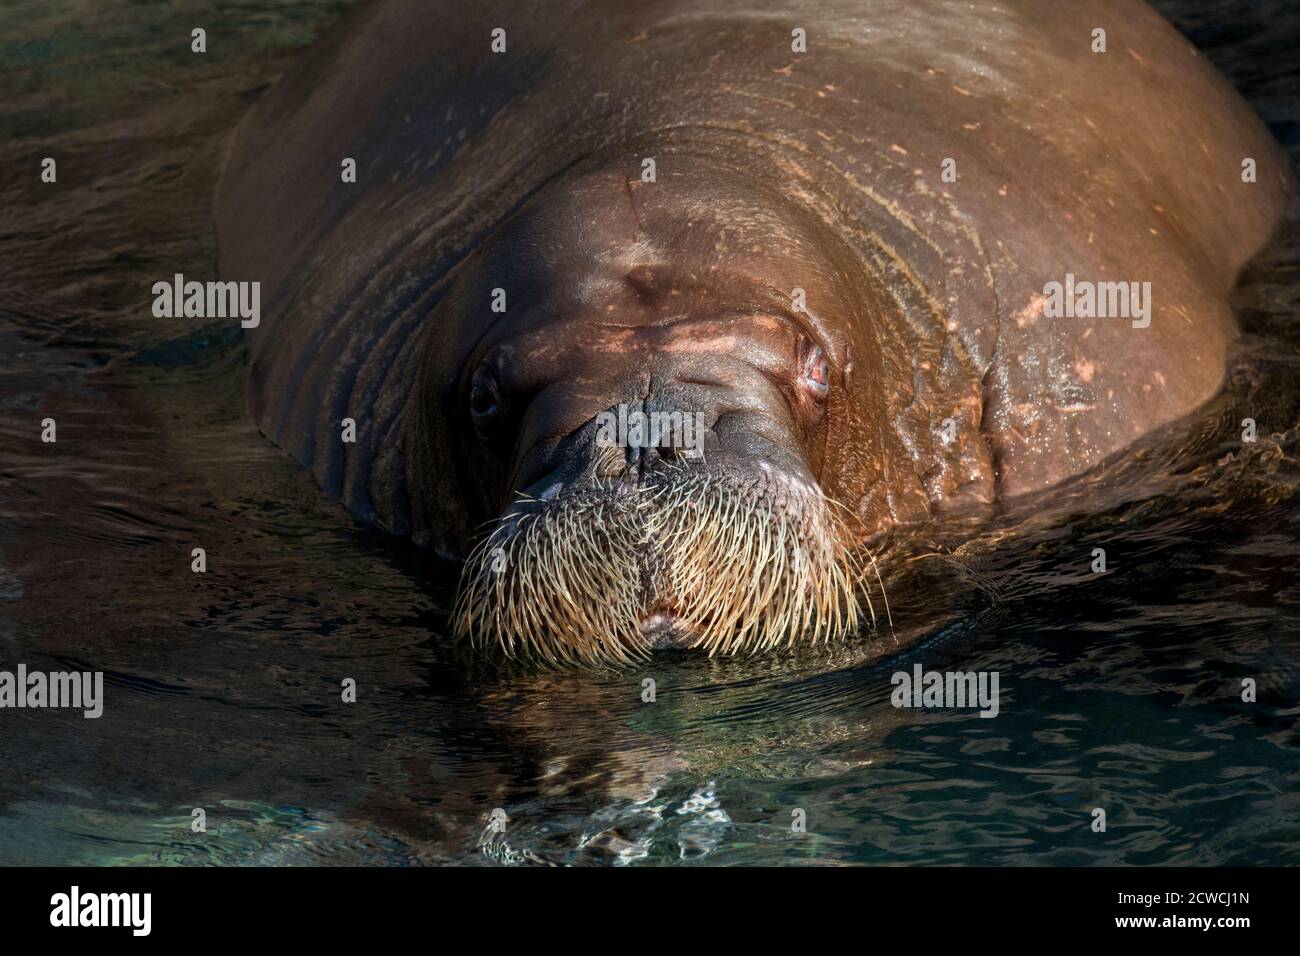 Walrus (Odobenus rosmarus) swimming in water, close up of head showing whiskers / vibrissae Stock Photo